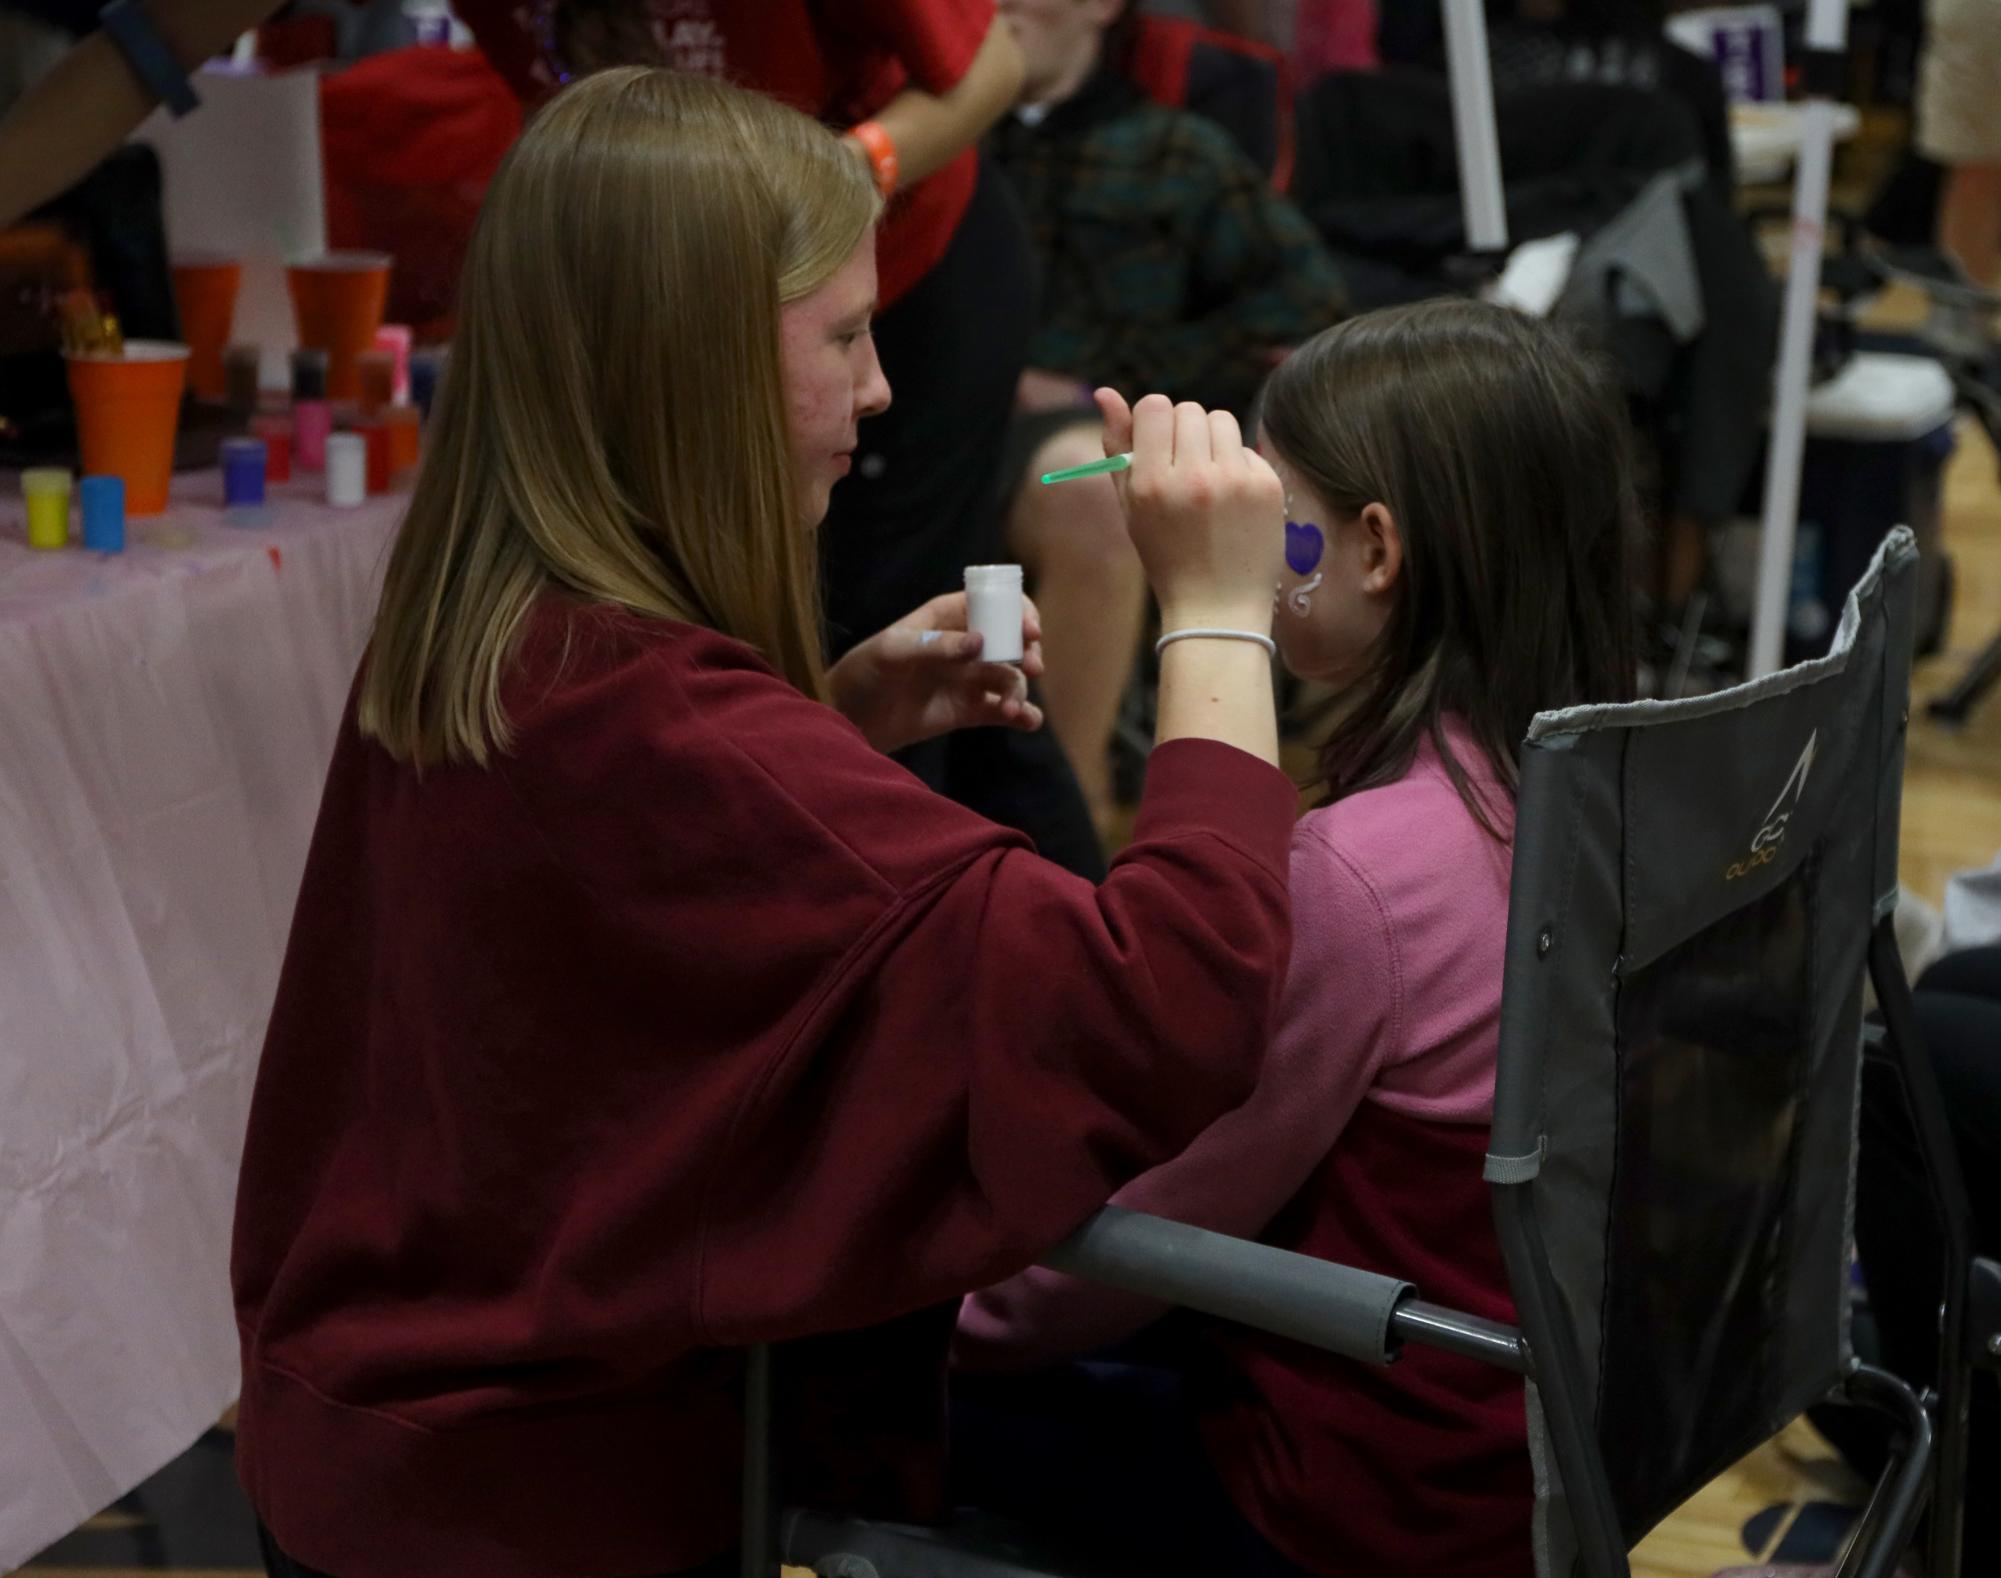 While working her booth, junior Laura Hickman paints a heart on a kids face.